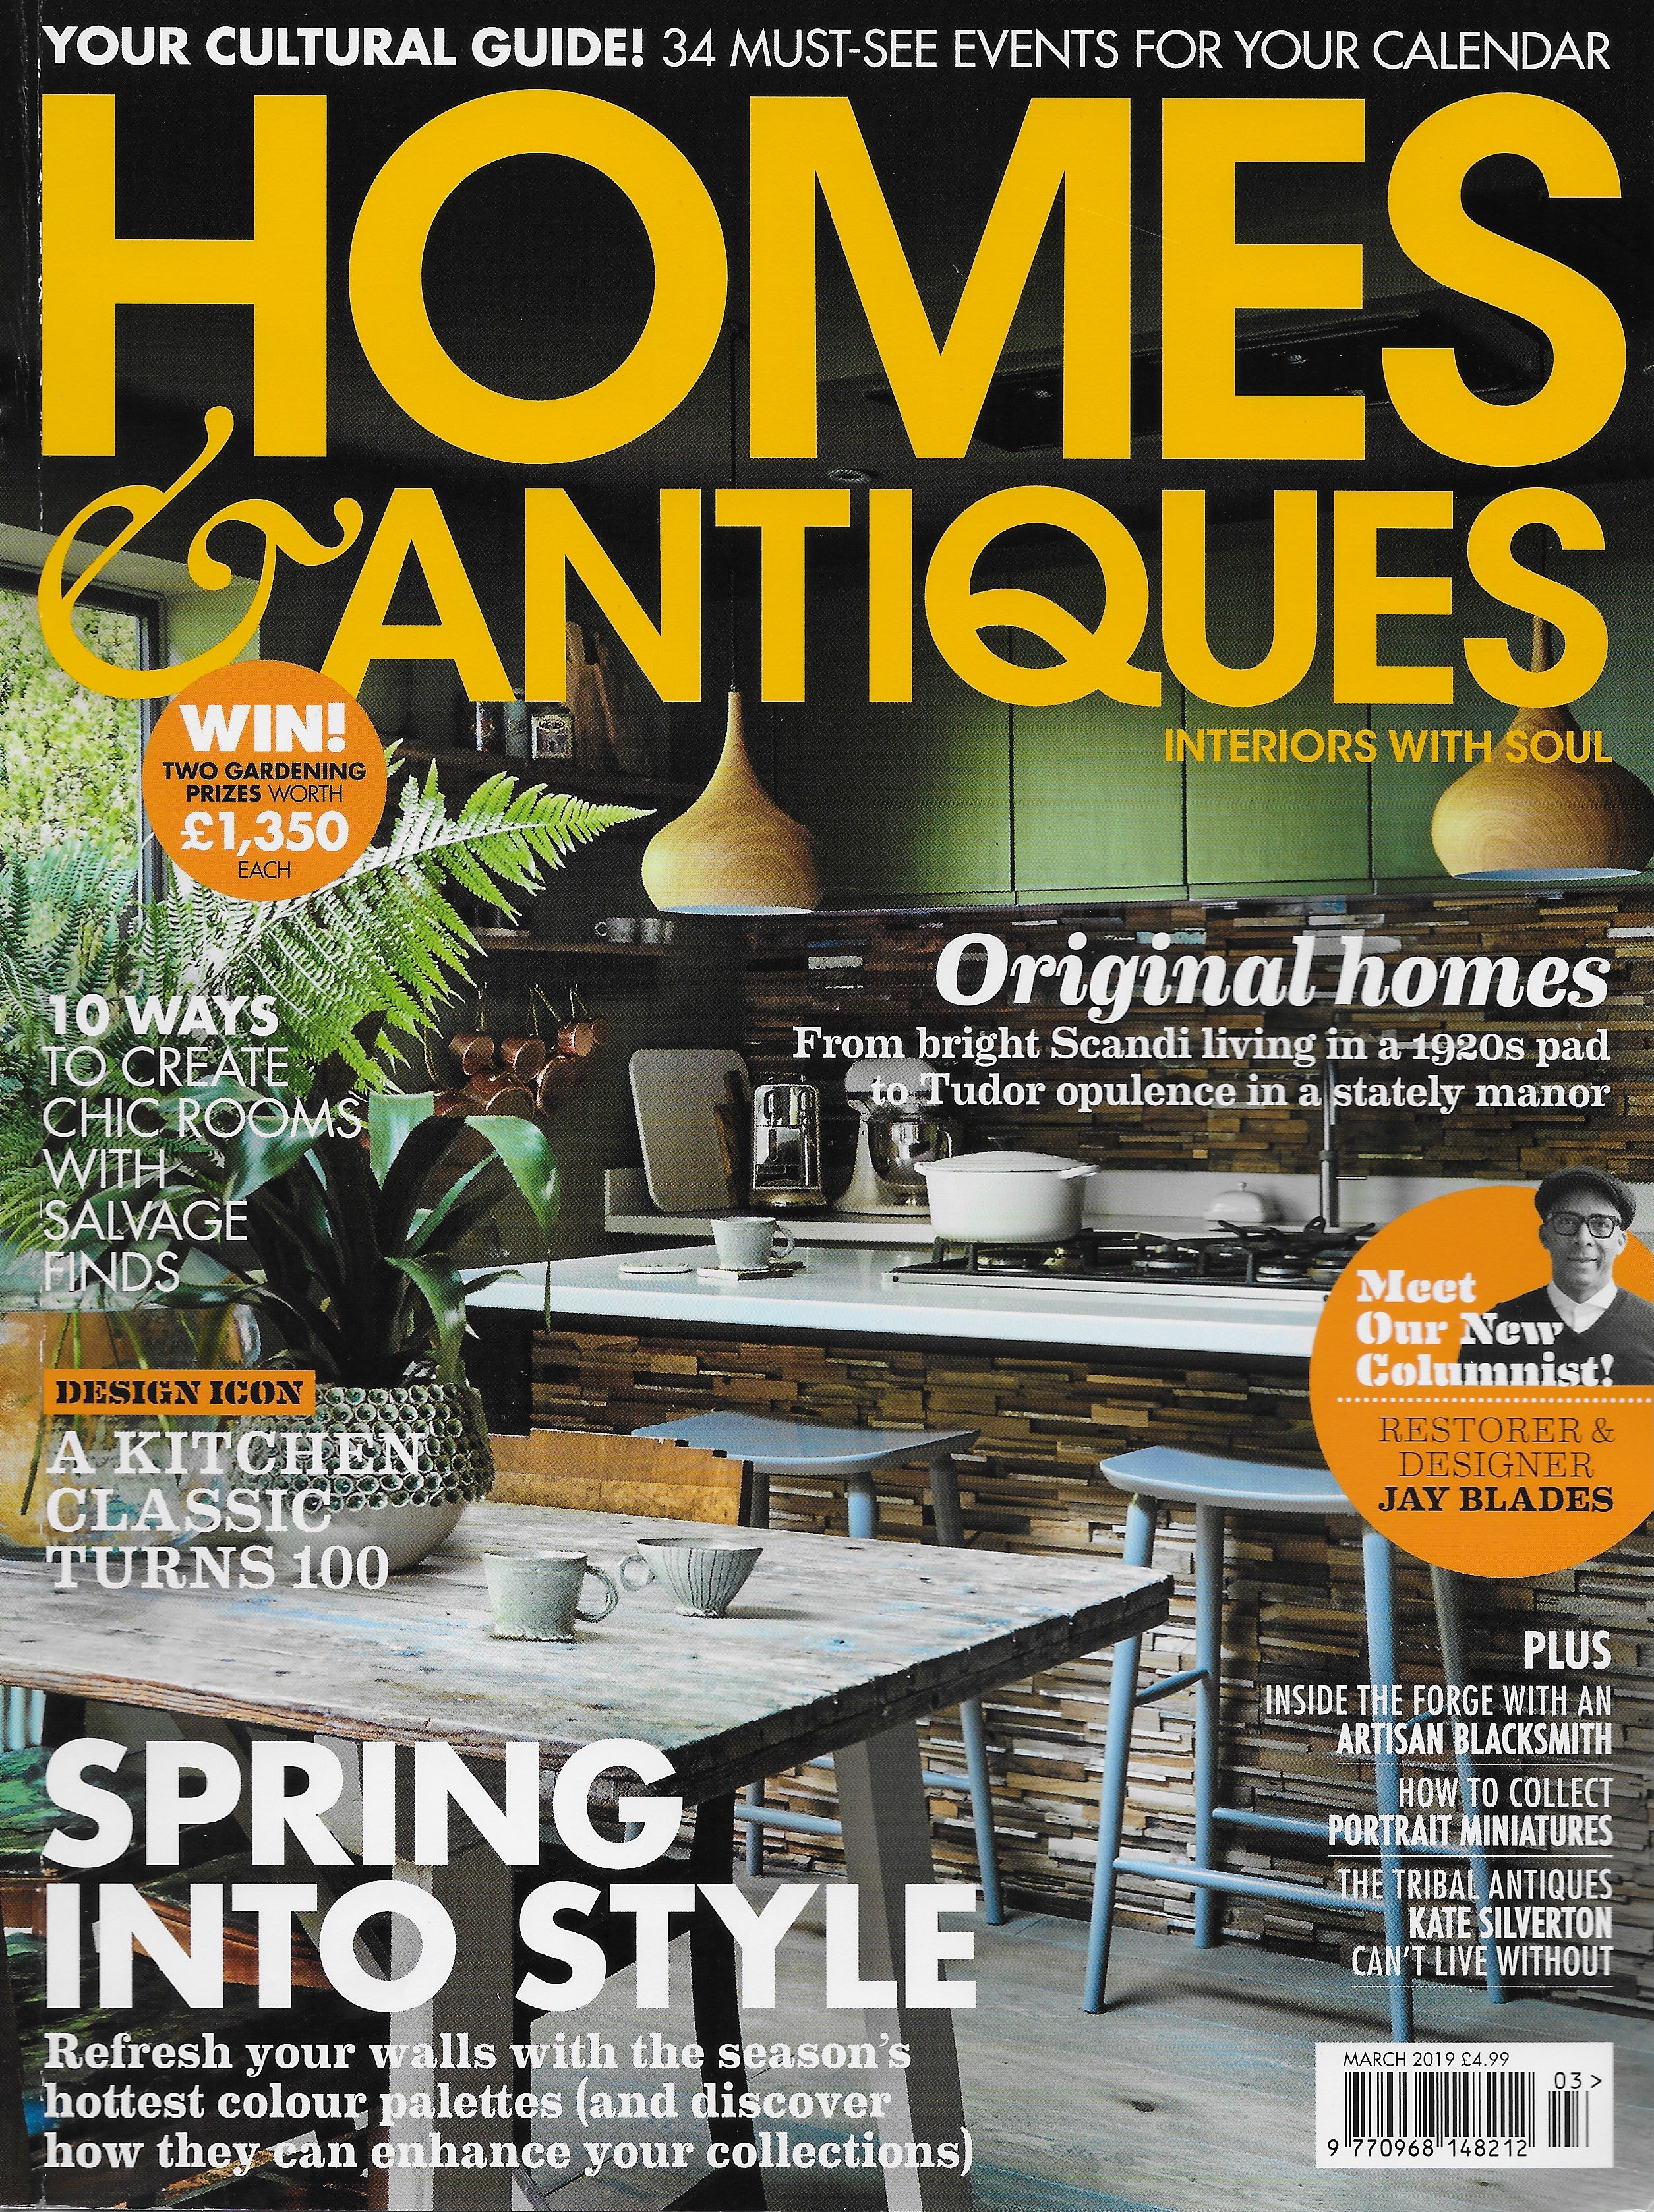 HOMES & ANTIQUES MAGAZINE - MARCH 2019